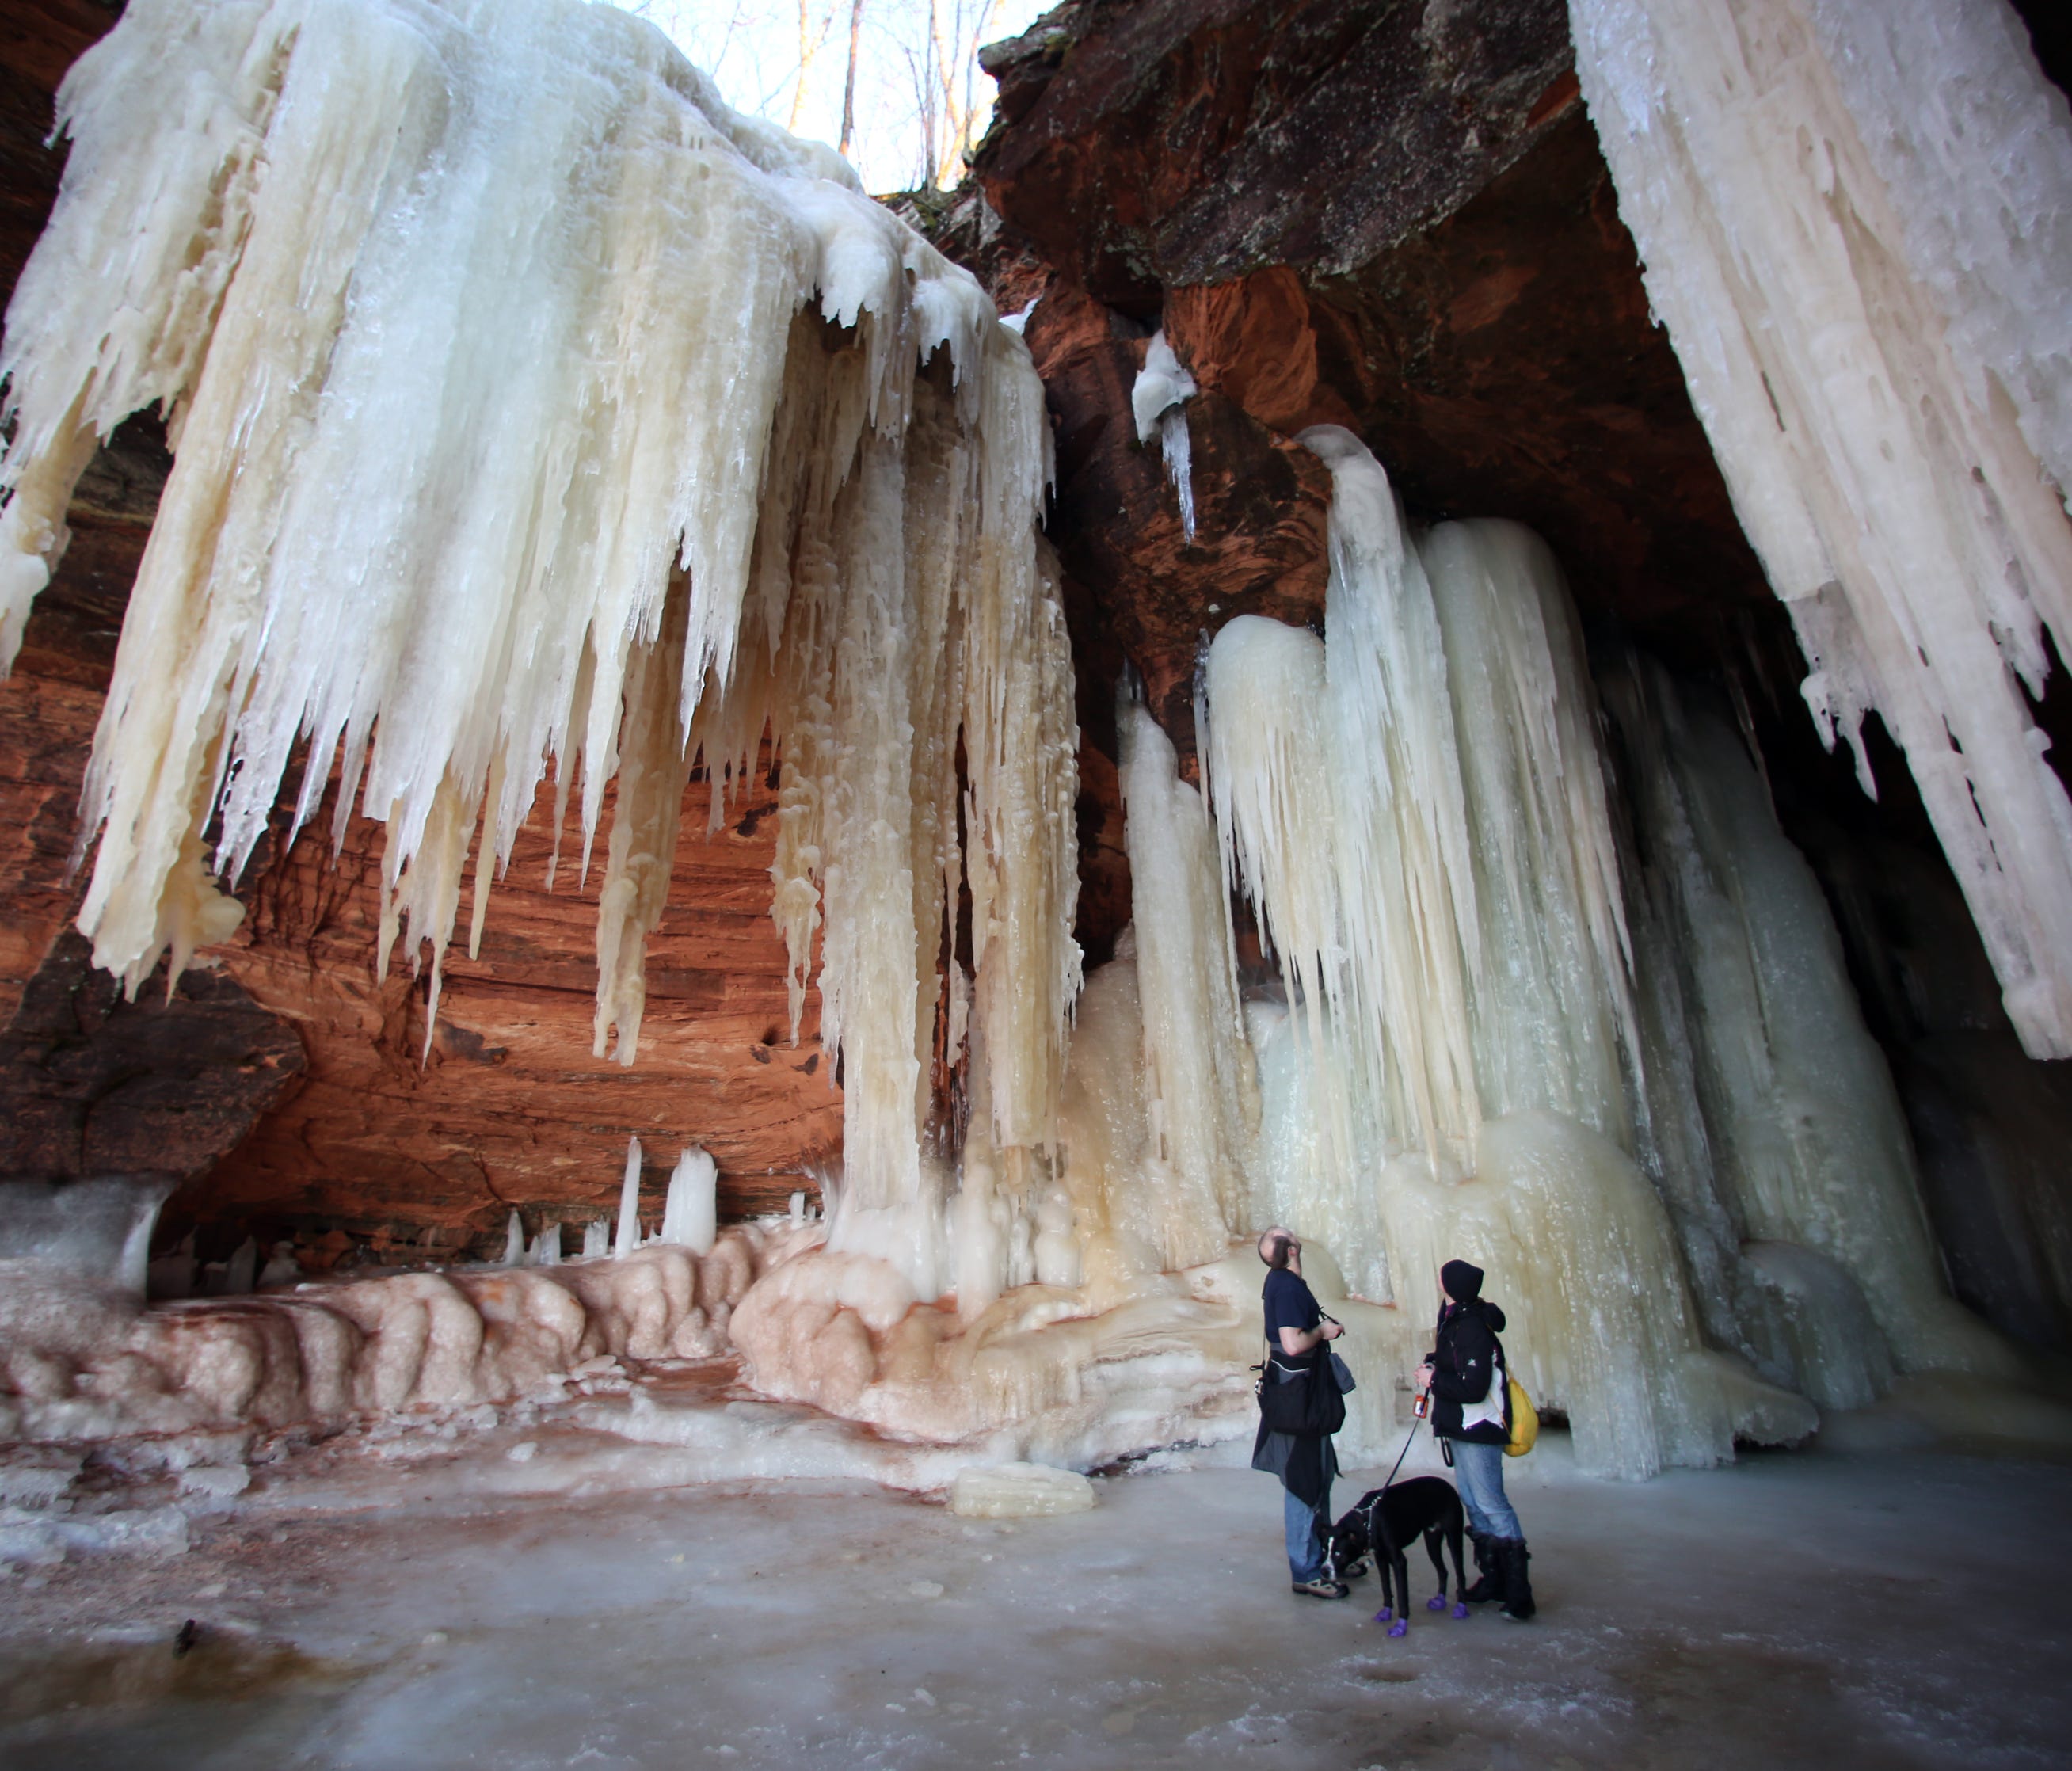 For the second straight year, the Apostle Islands ice caves were accessible in 2015 due to thick ice thanks to the cold winter. Visitors were able to traverse the frozen Lake Superior shores near Bayfield, hiking more than two miles round-trip to vie